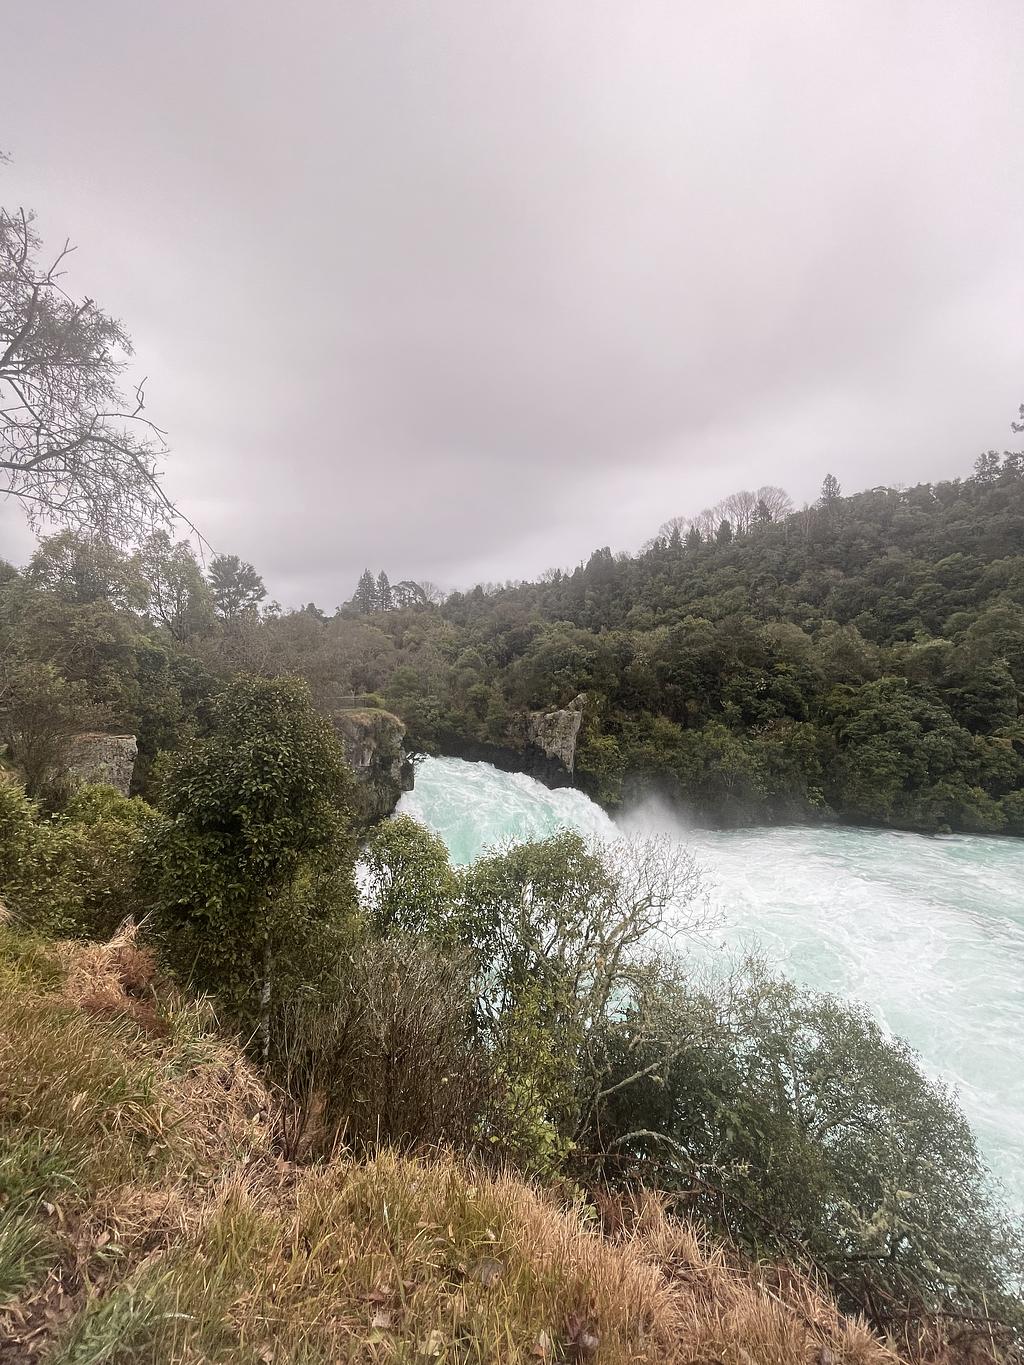 Huka falls, a waterfall partly obscured by a tree